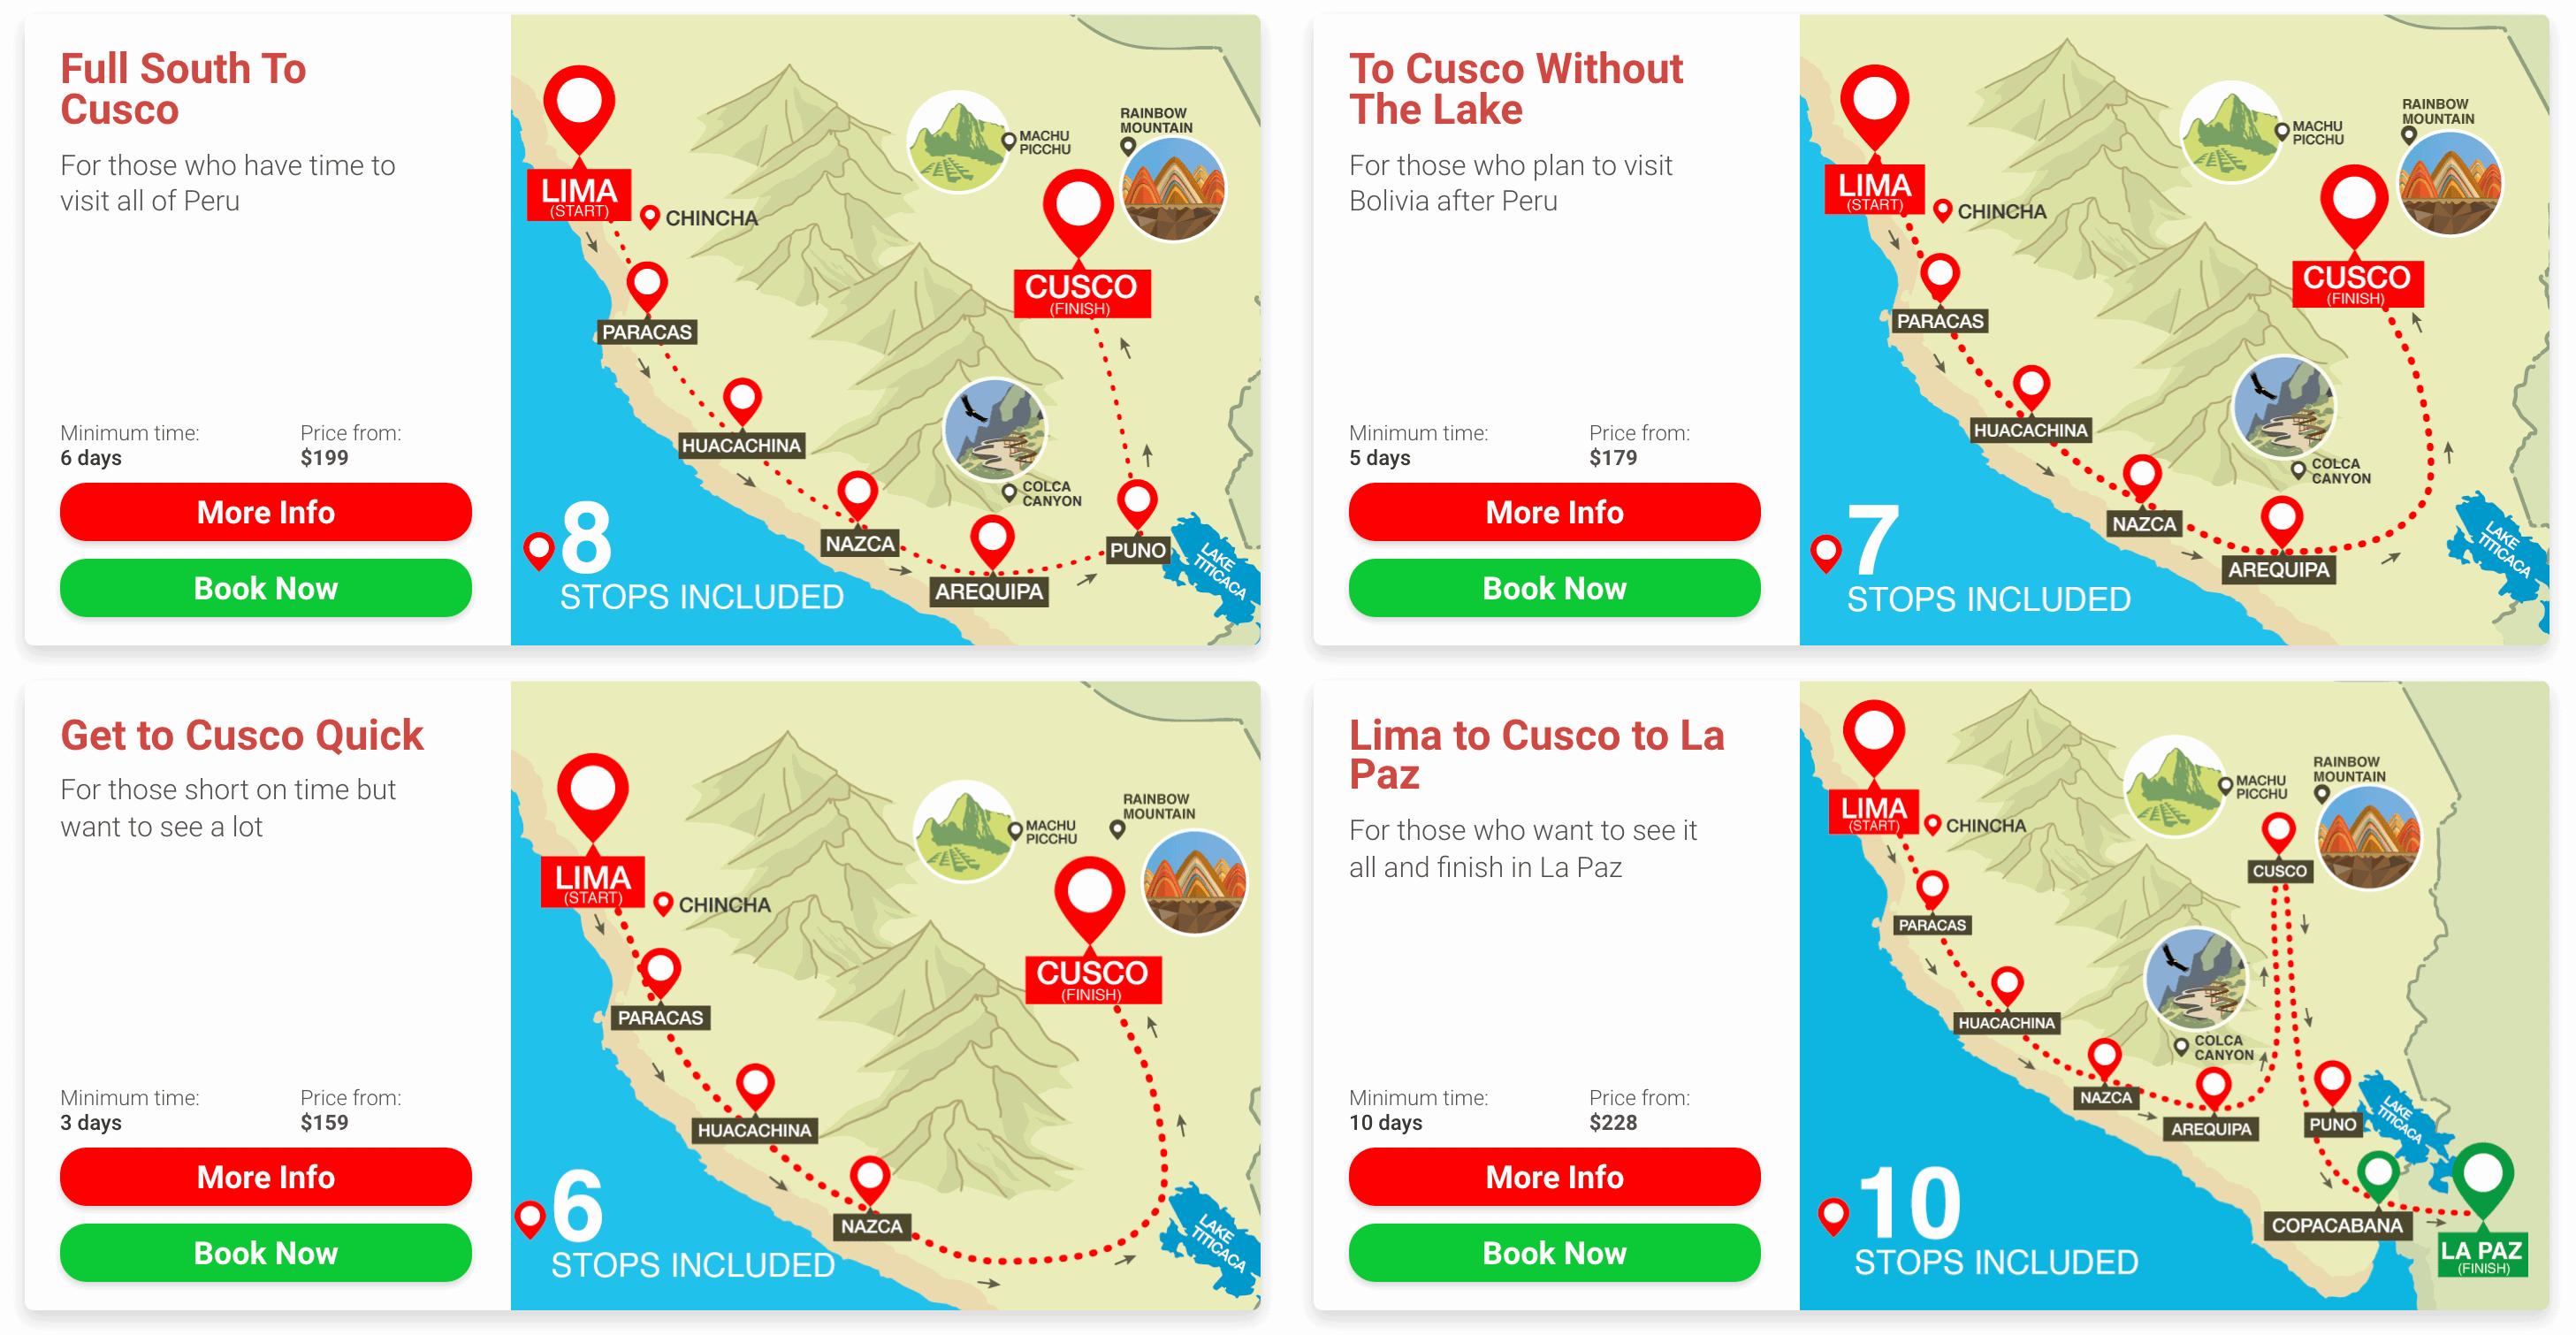 Four maps of Peru showing red location pins denoting Peru Hop bus stops across the country. 